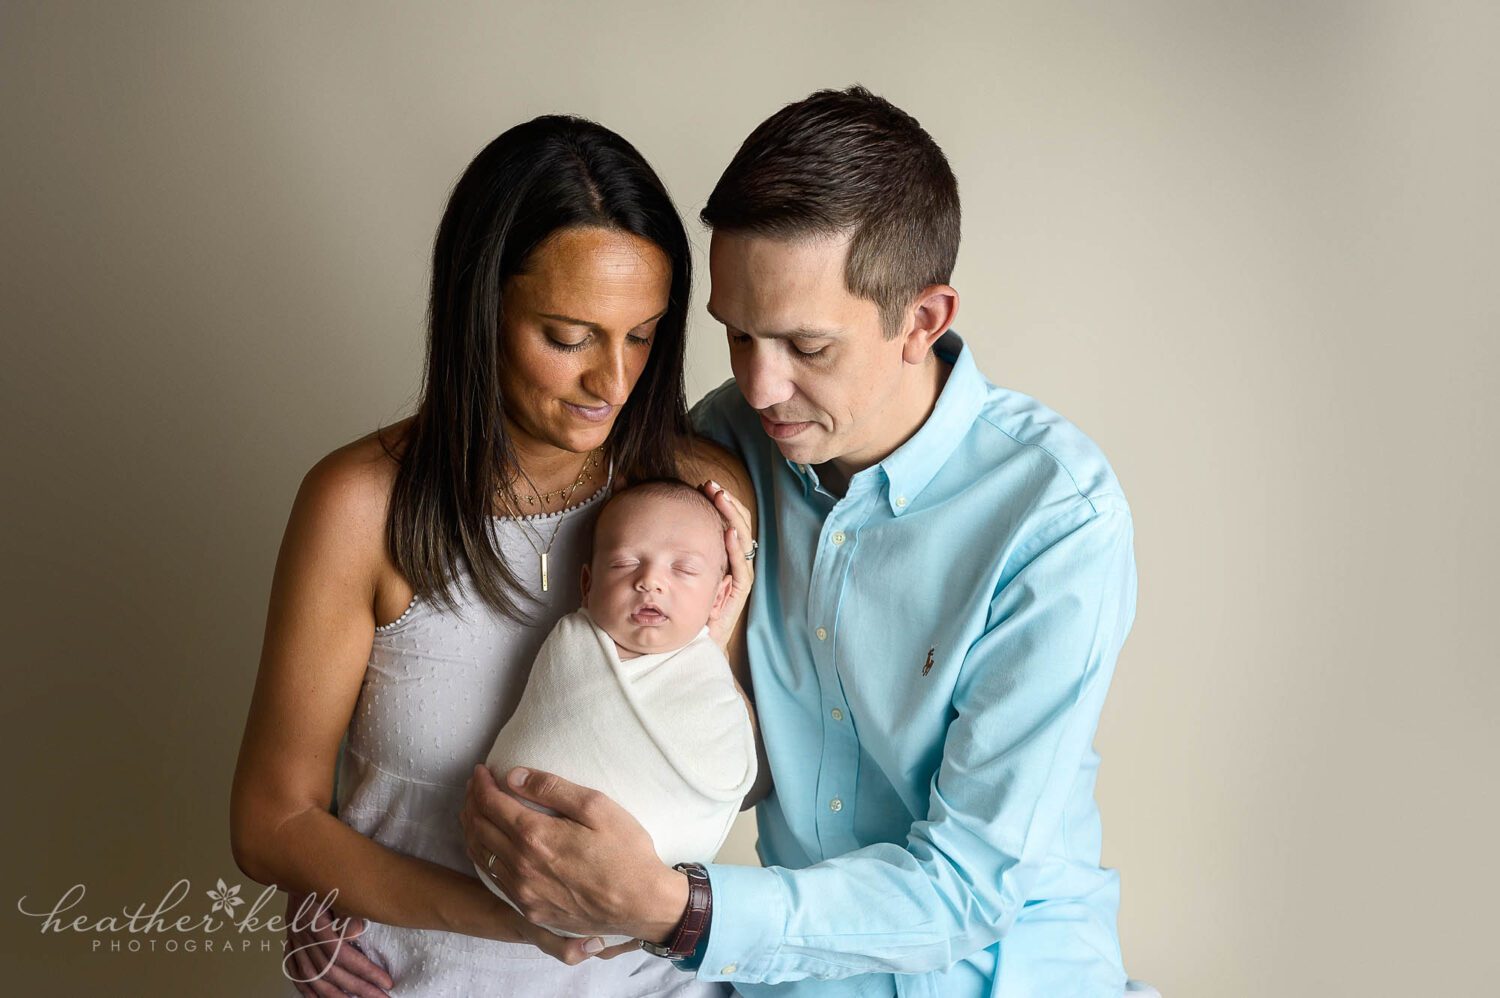 new mom and dad holding their newborn son. They are both looking down at him. He is wrapped in a white swaddle. newborn photography